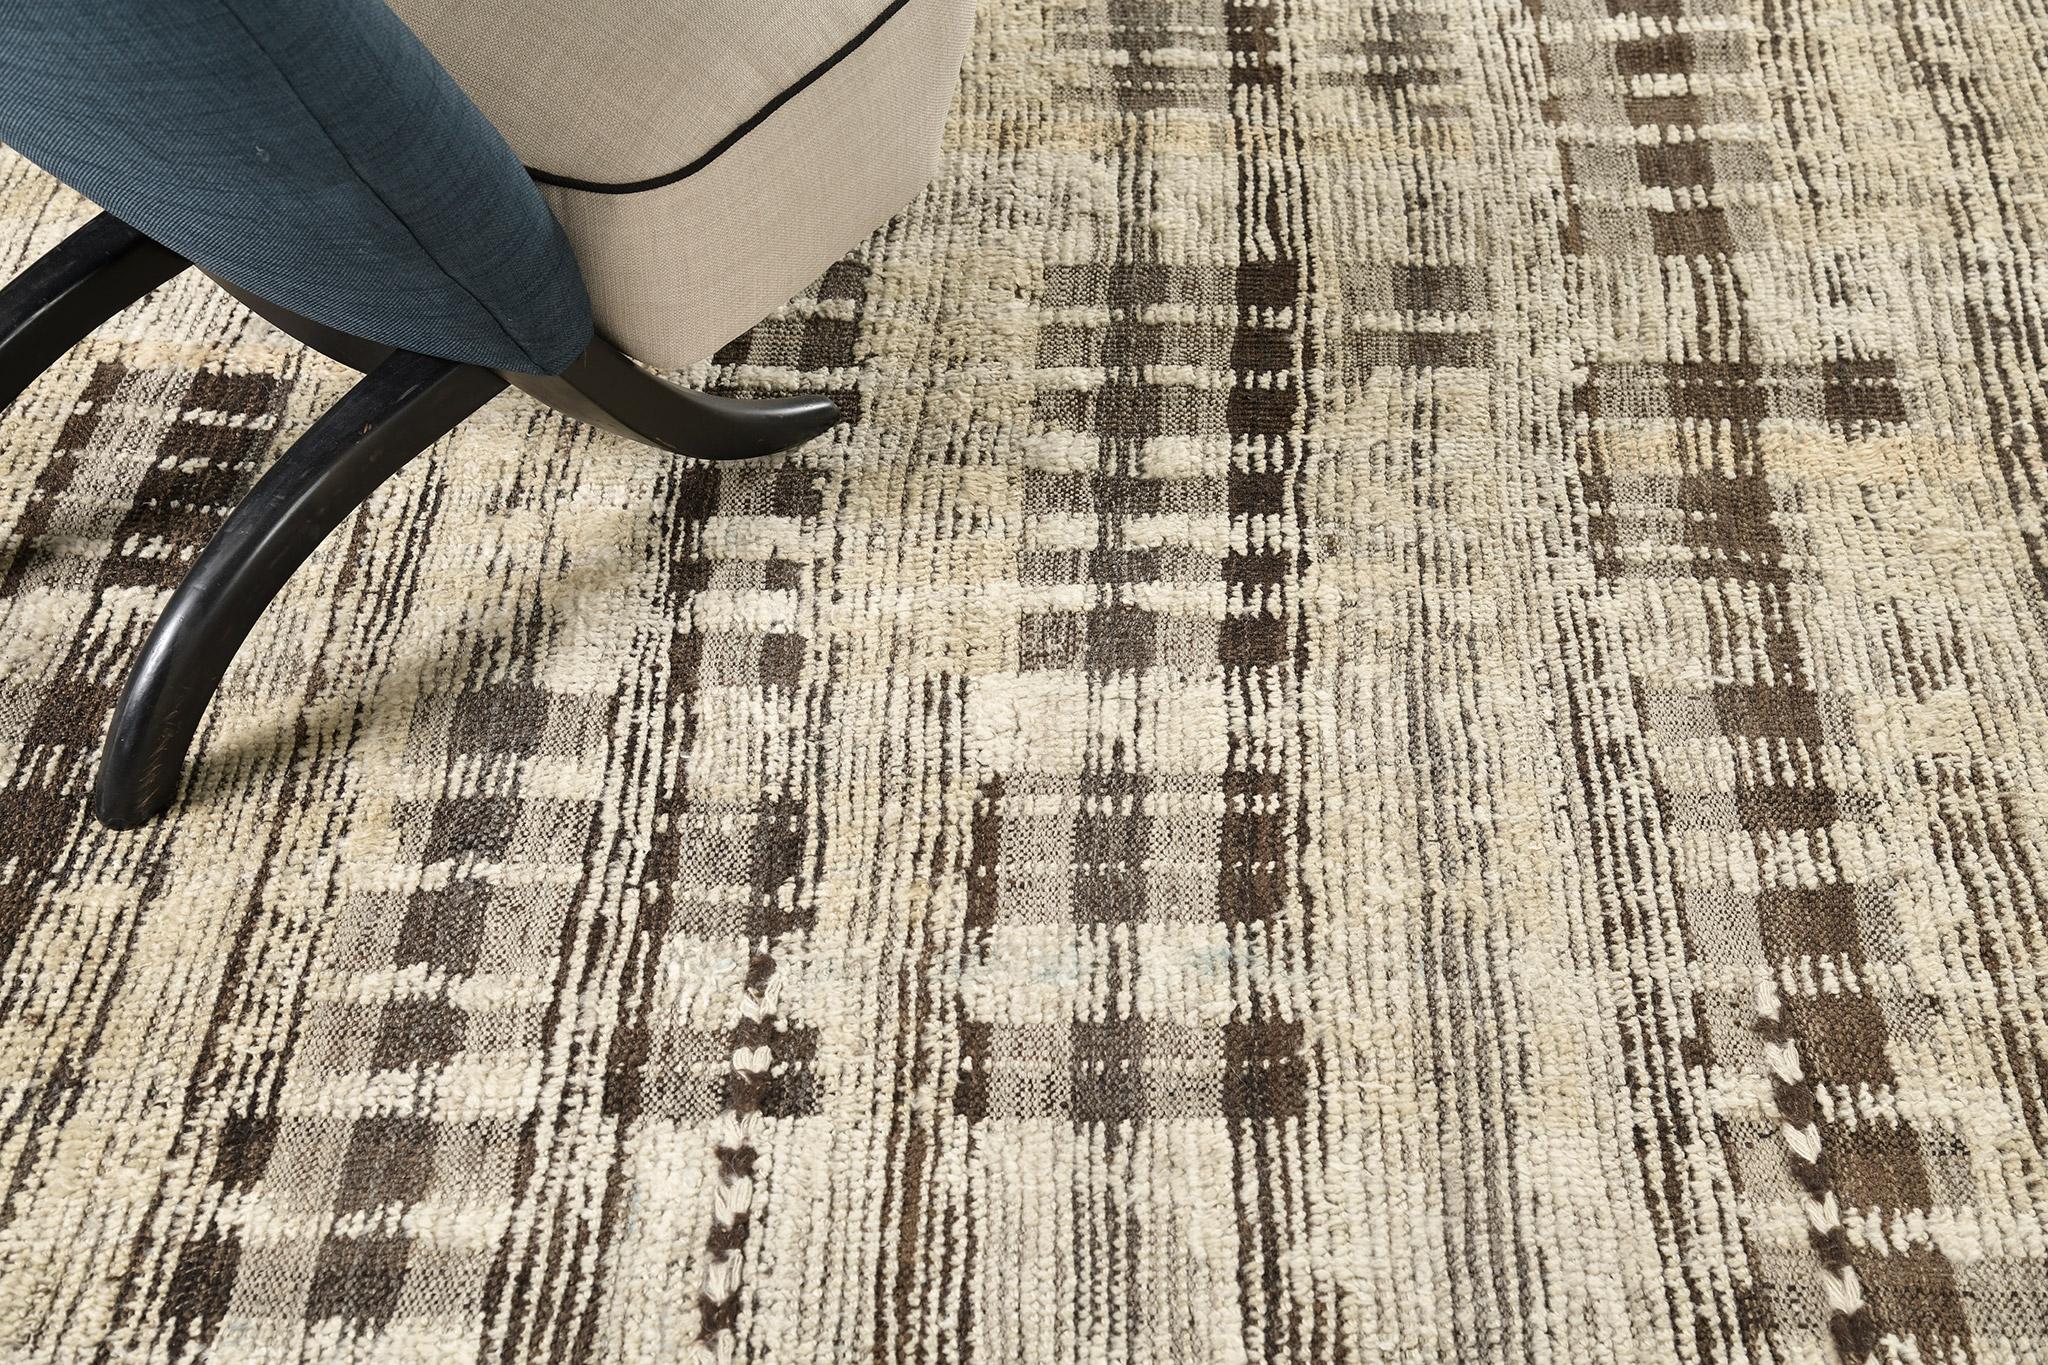 Baccata uses linework and color to create definition and movement into handwoven wool. Line detailing in taupe and umber brown fascinatingly move across the rug. Detailed natural flatweave runs around the border with tassels adding an exquisite